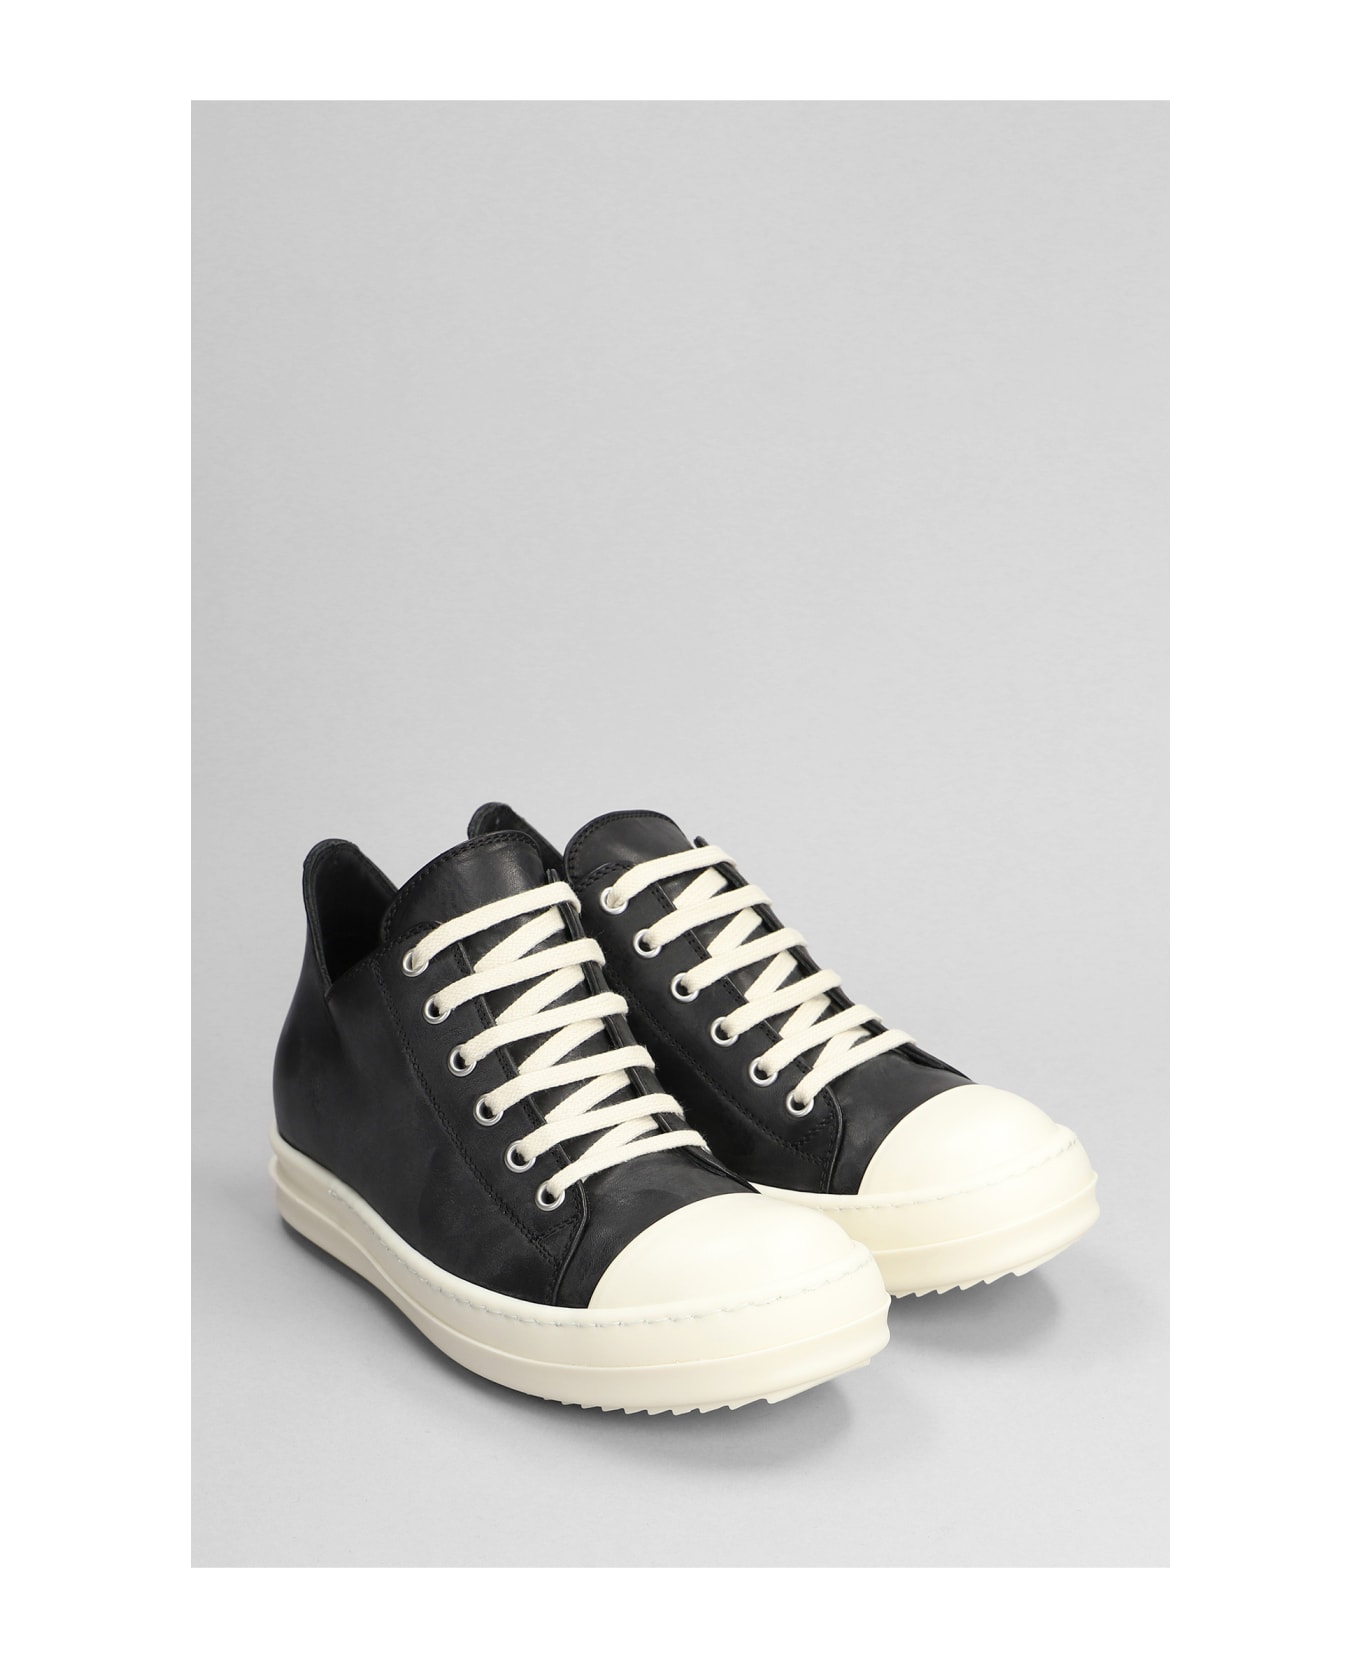 Rick Owens Round-toe Lace-up Sneakers - black スニーカー